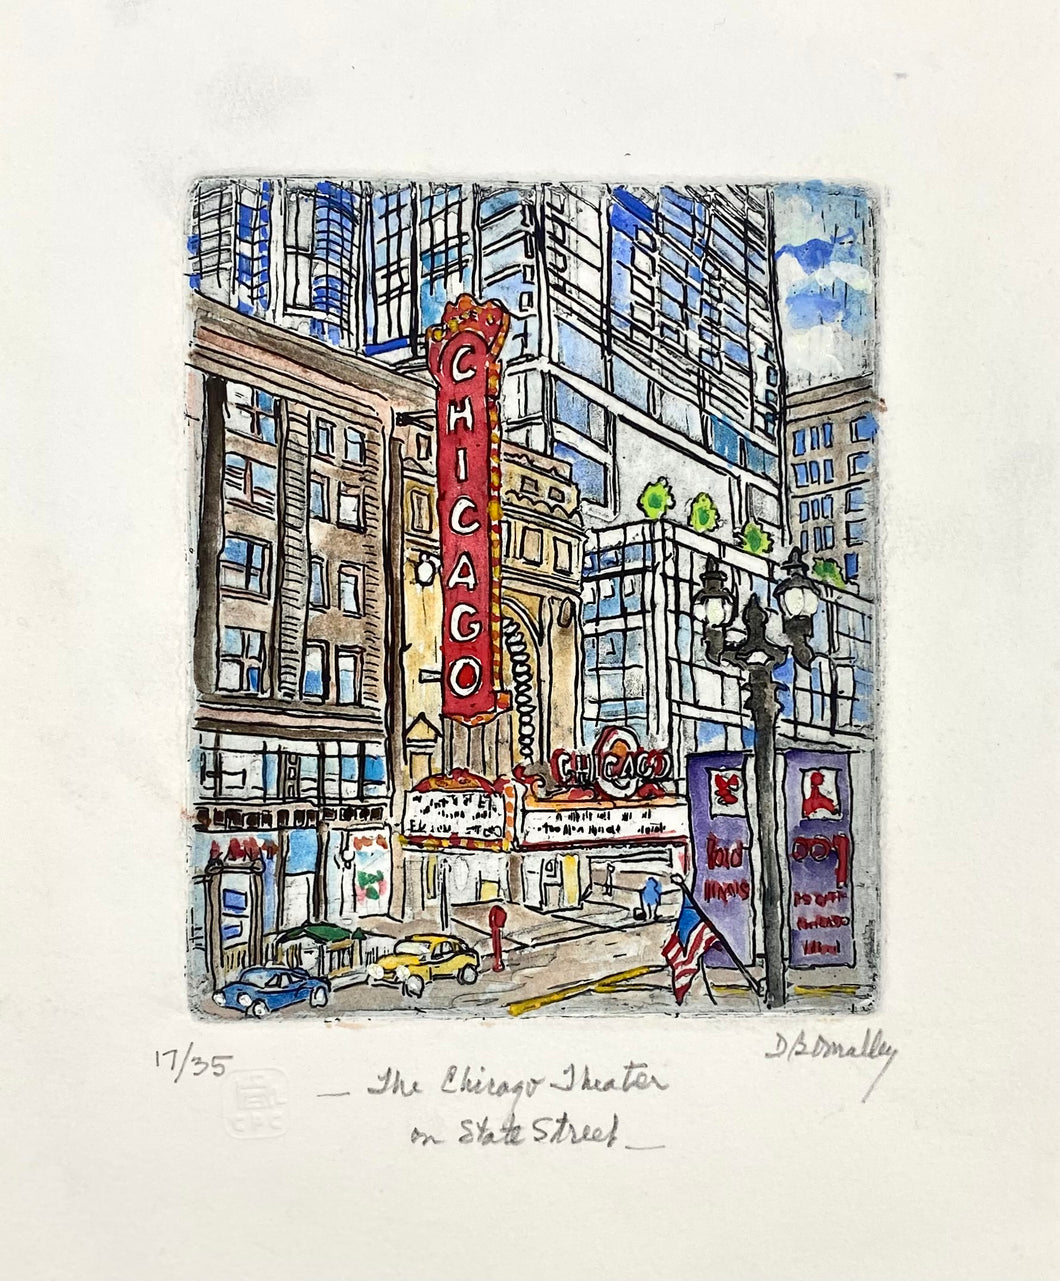 The Chicago Theatre on State Street by Dennis O'Malley